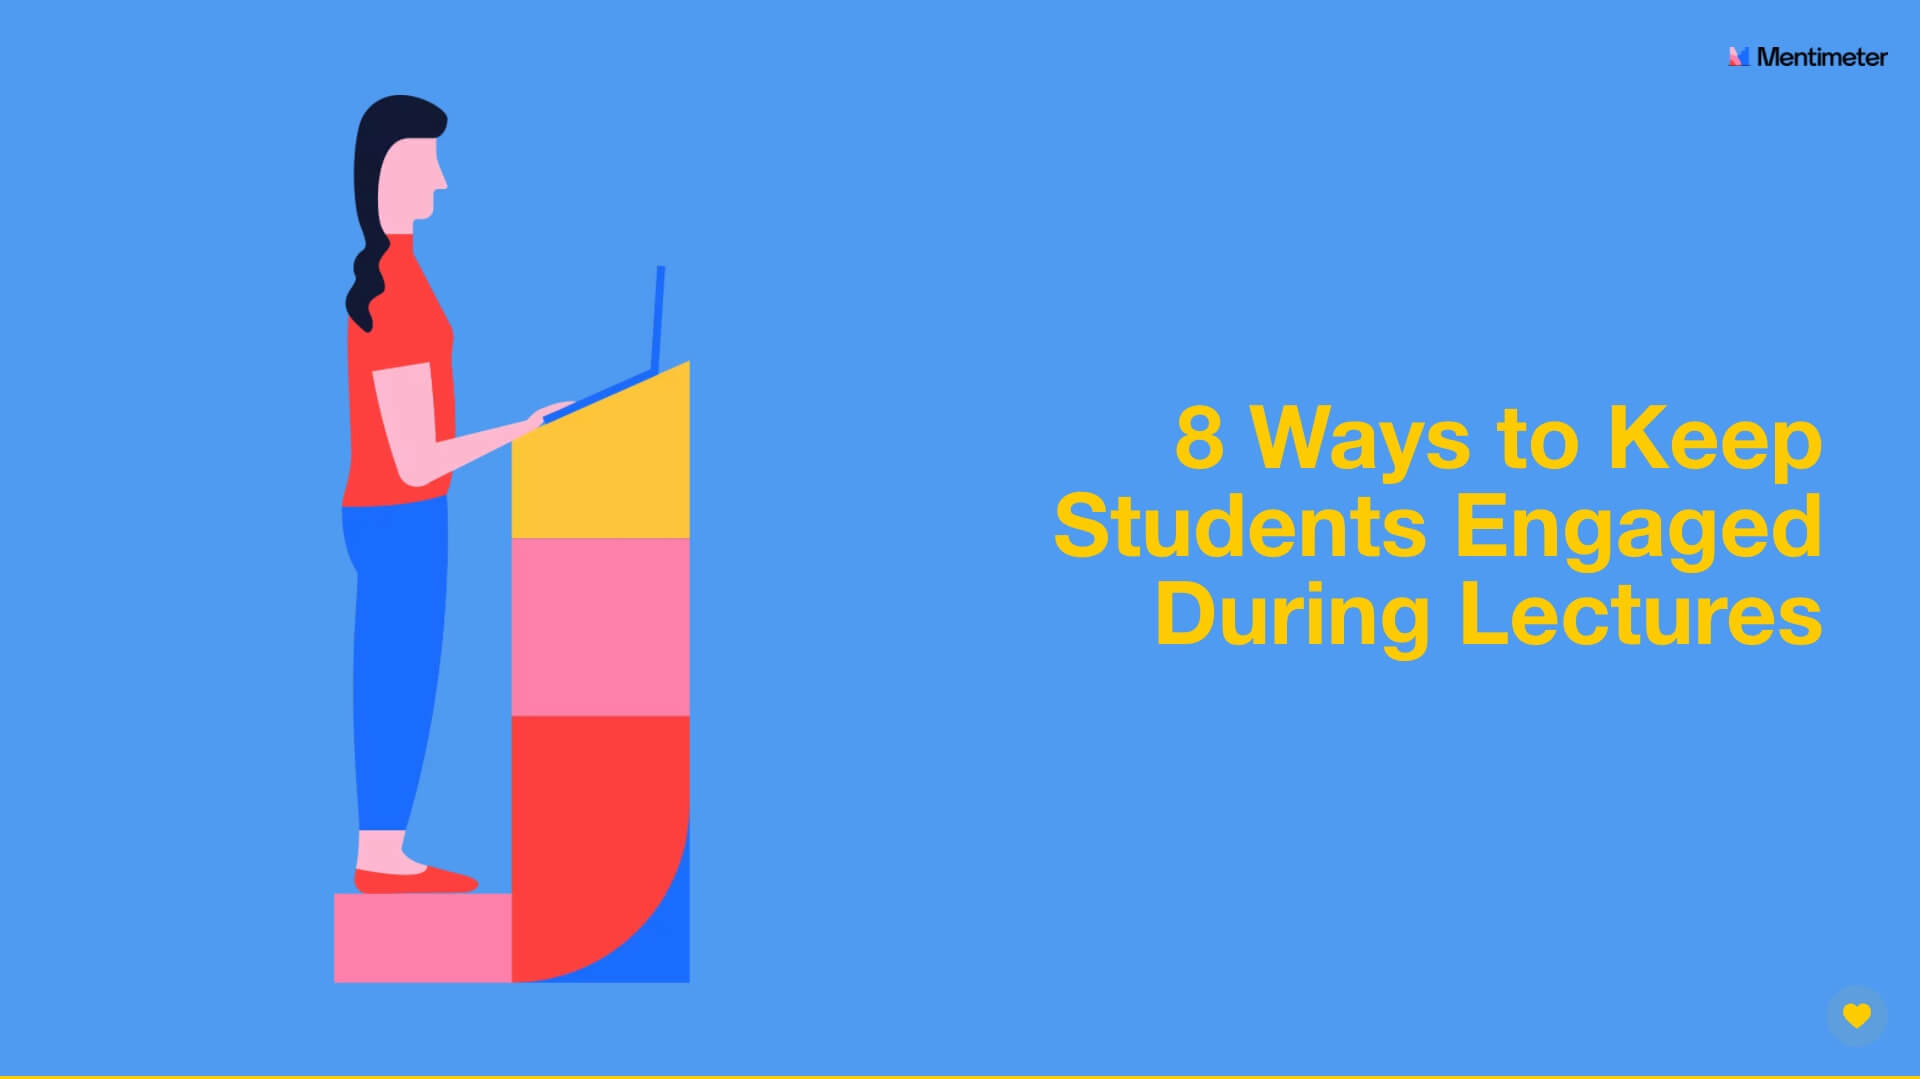 A Creative Way to Boost Student Engagement